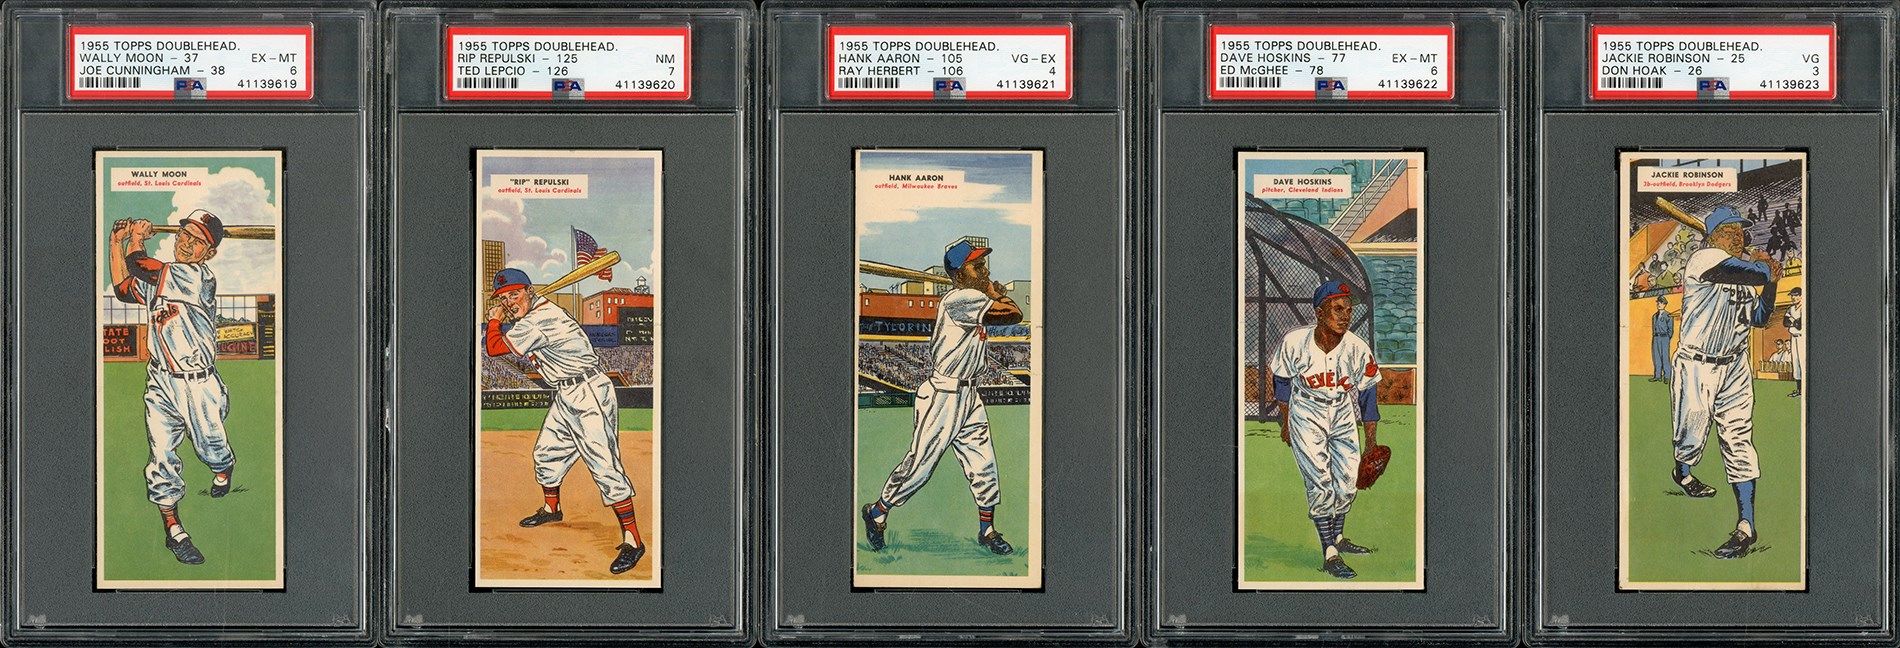 Baseball and Trading Cards - 1955 Topps Doubleheaders Complete Set (w/5 PSA Graded)